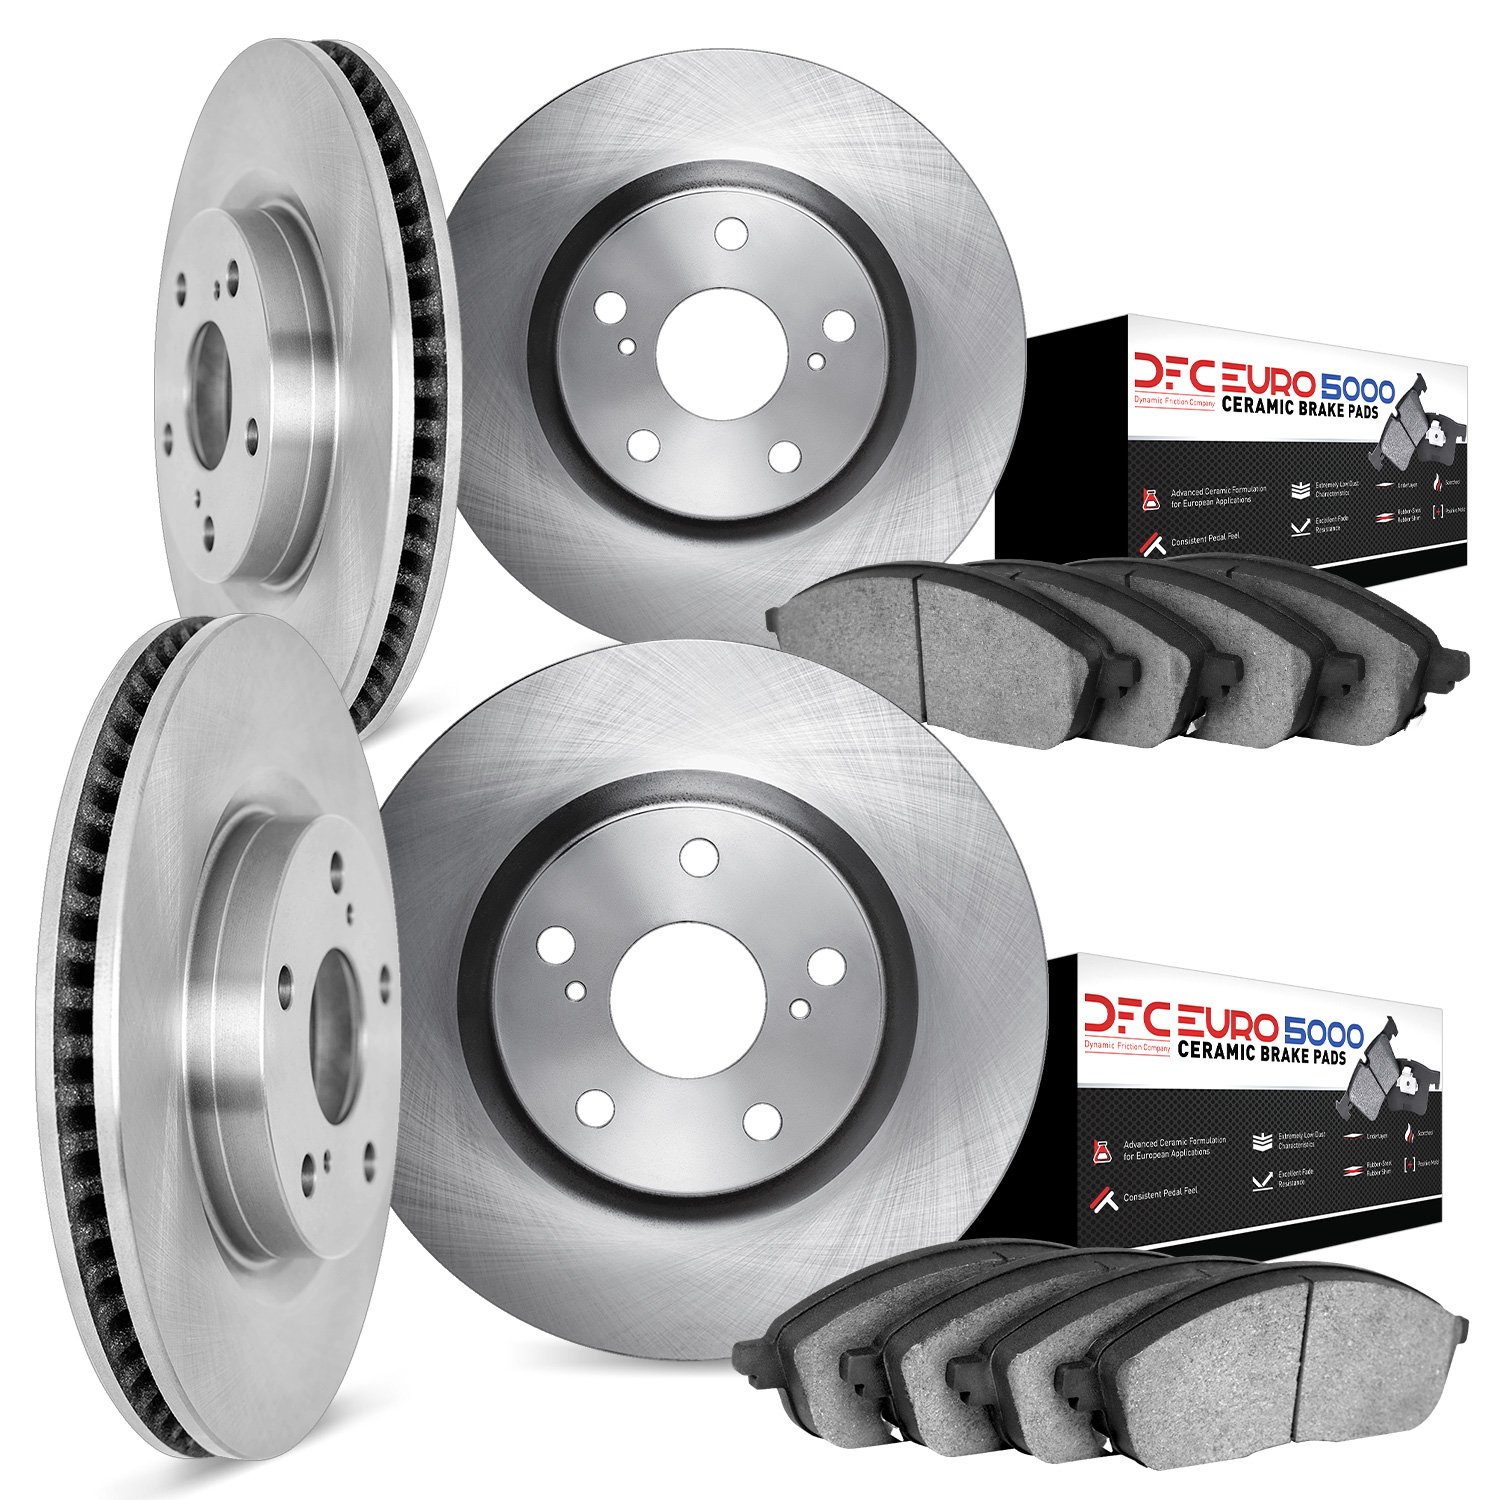 6604-31028 Brake Rotors w/5000 Euro Ceramic Brake Pads, 2013-2018 BMW, Position: Front and Rear